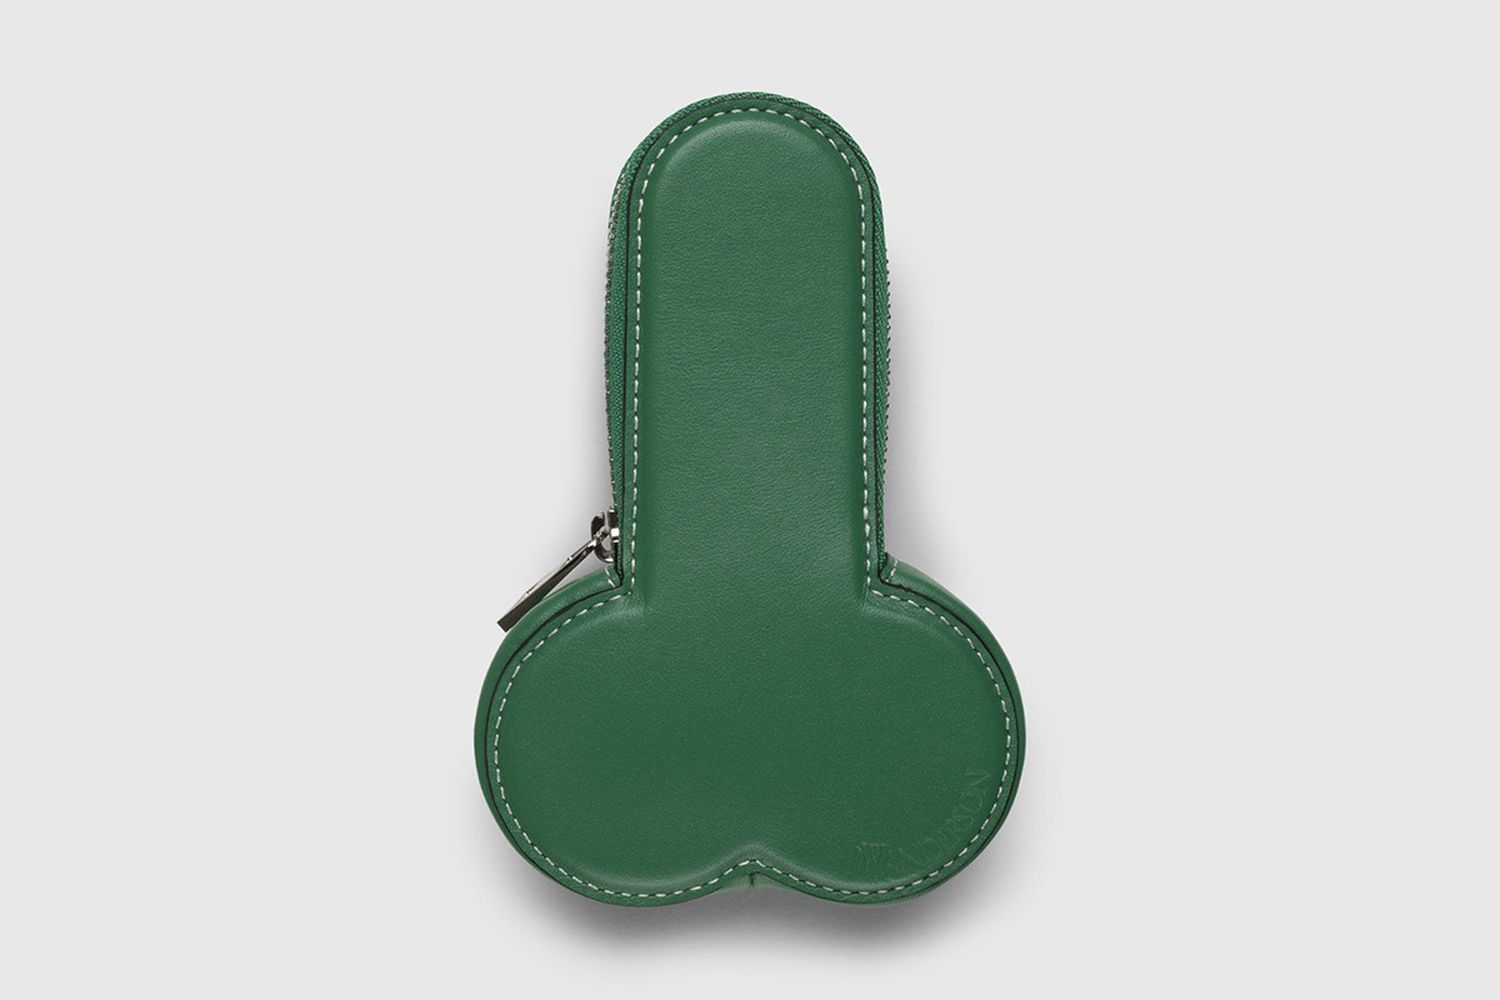 Penis Coin Purse